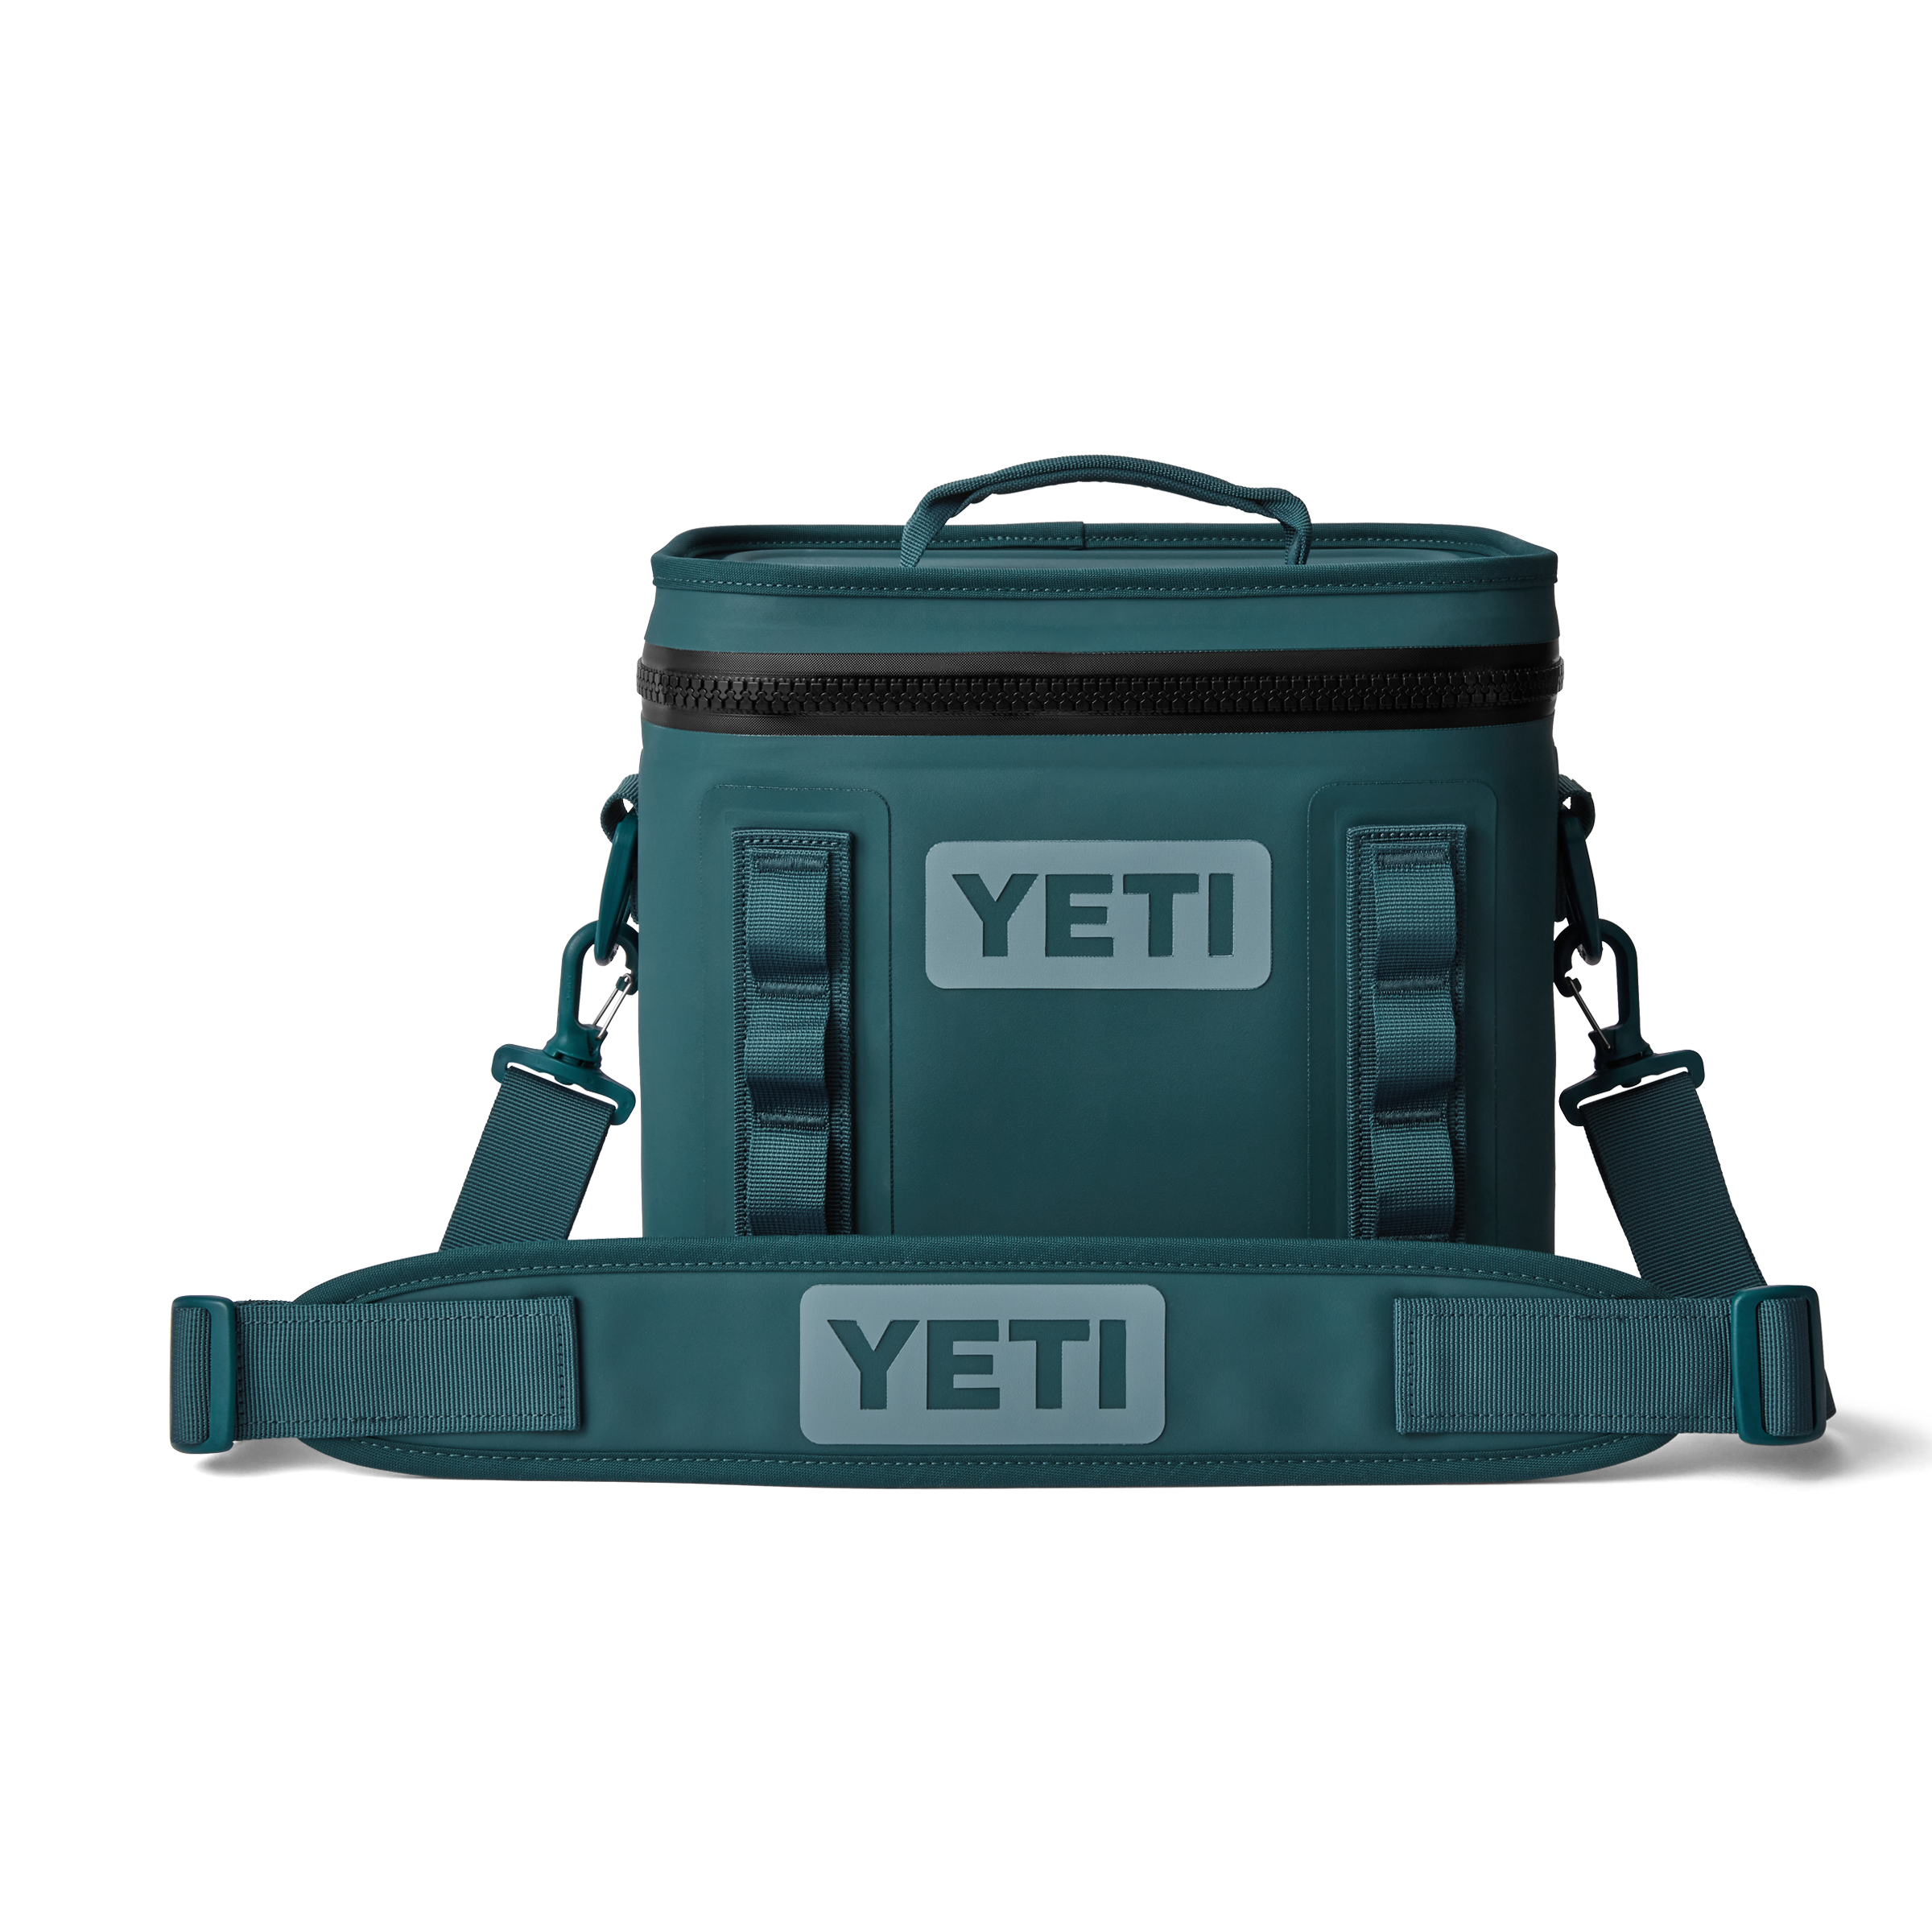 hydrolok zipper, 100% leak proof, coldcell insulation, dryhide shell, keep cans cold, yeti